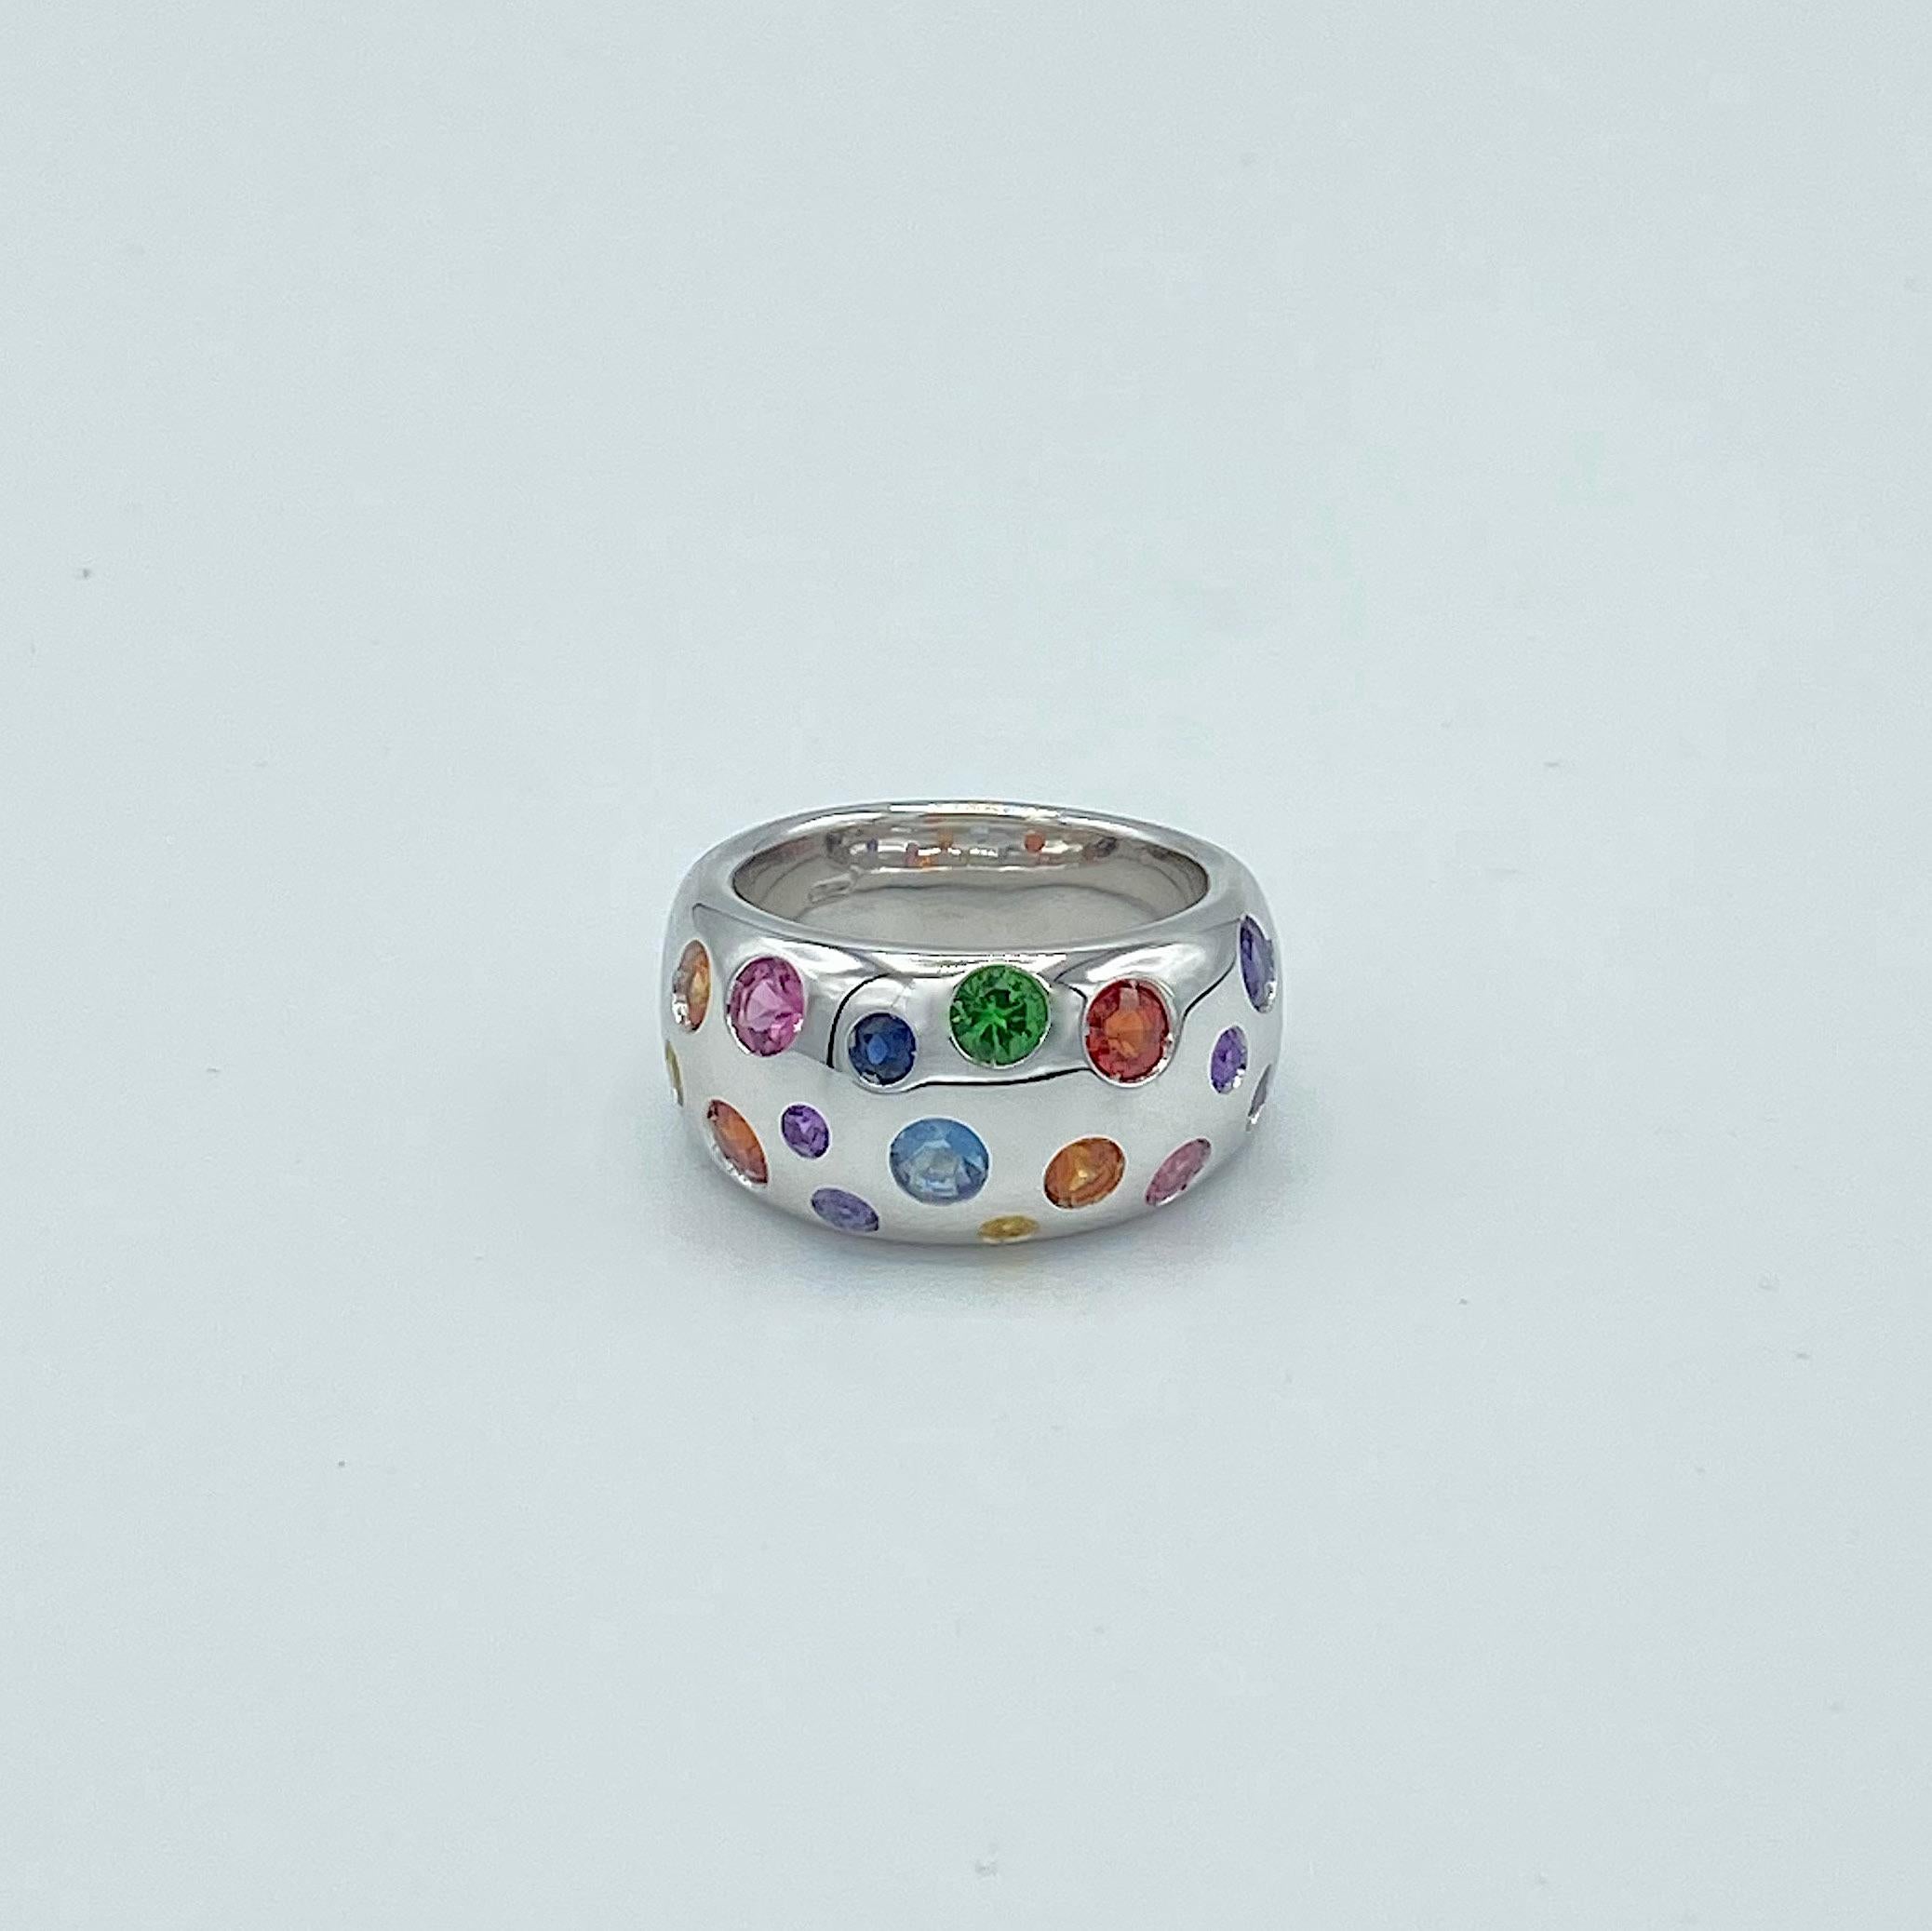 Rainbow Sapphire Aquamarine Amethyst Semiprecious Tsavorite 18KT Gold Band Ring
This white gold band ring is set with sapphires and semi-precious stones of different sizes and colors that follow the nuance of the rainbow.
The stones are: tsavorite,